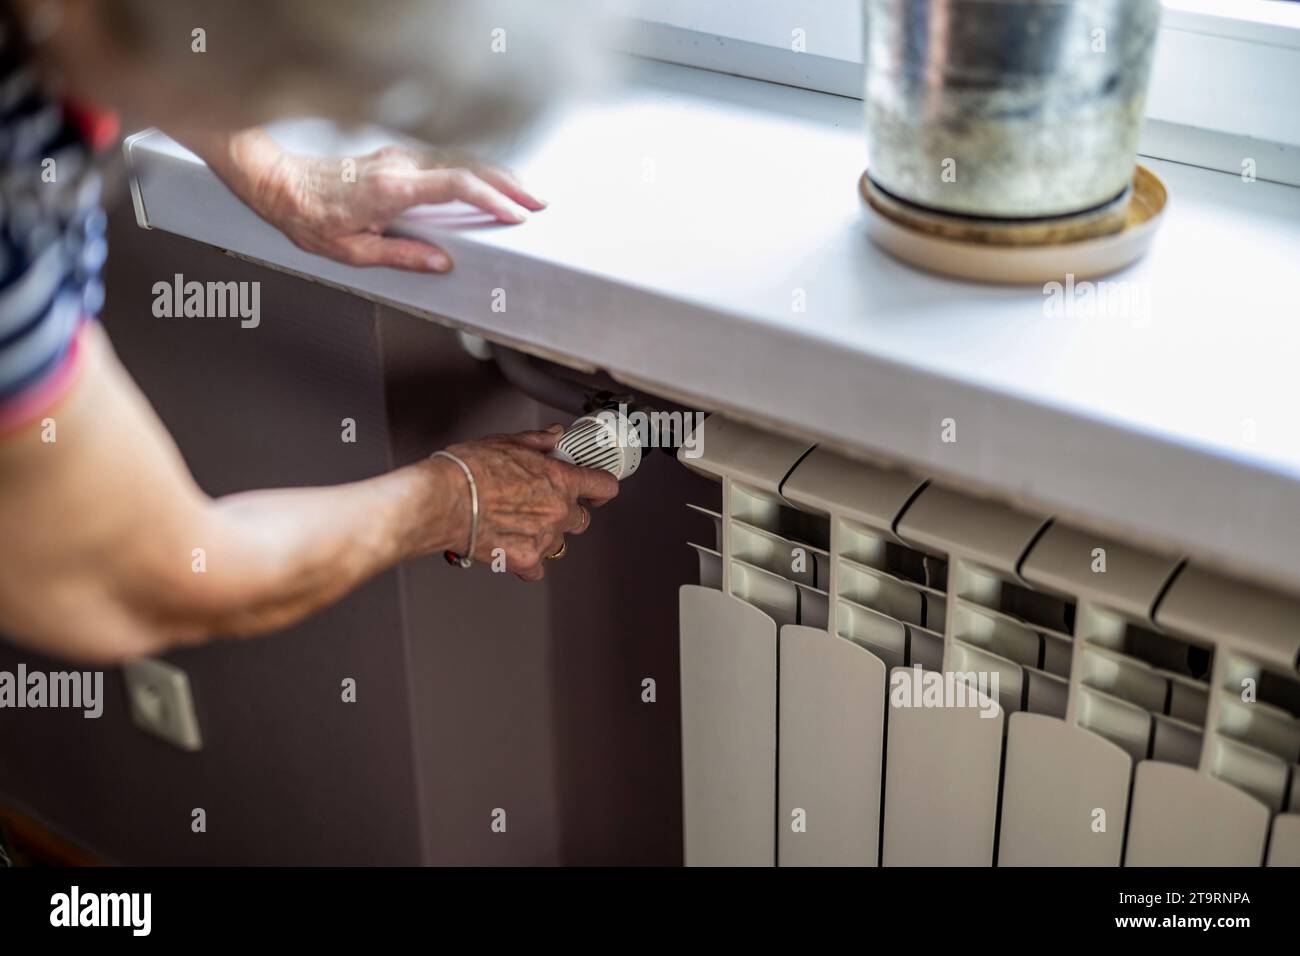 Senior woman checking temperature on a heating radiator in the kitchen at home Stock Photo